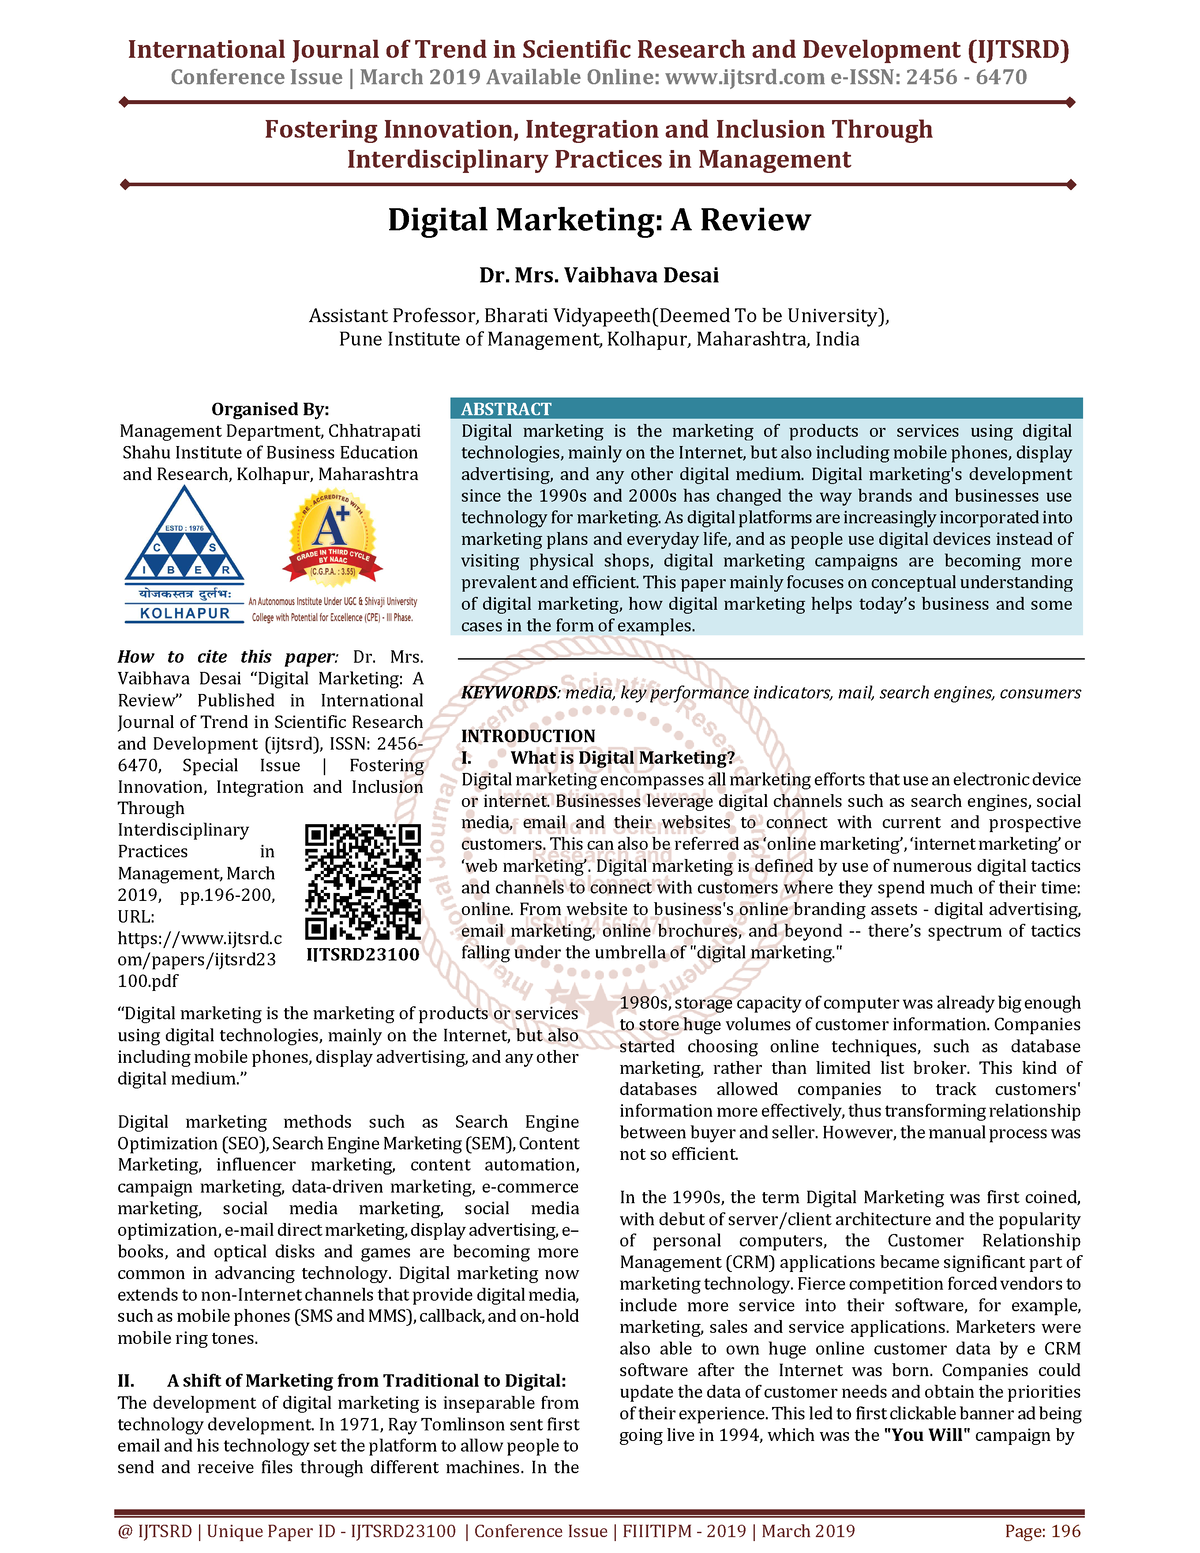 research articles on digital marketing